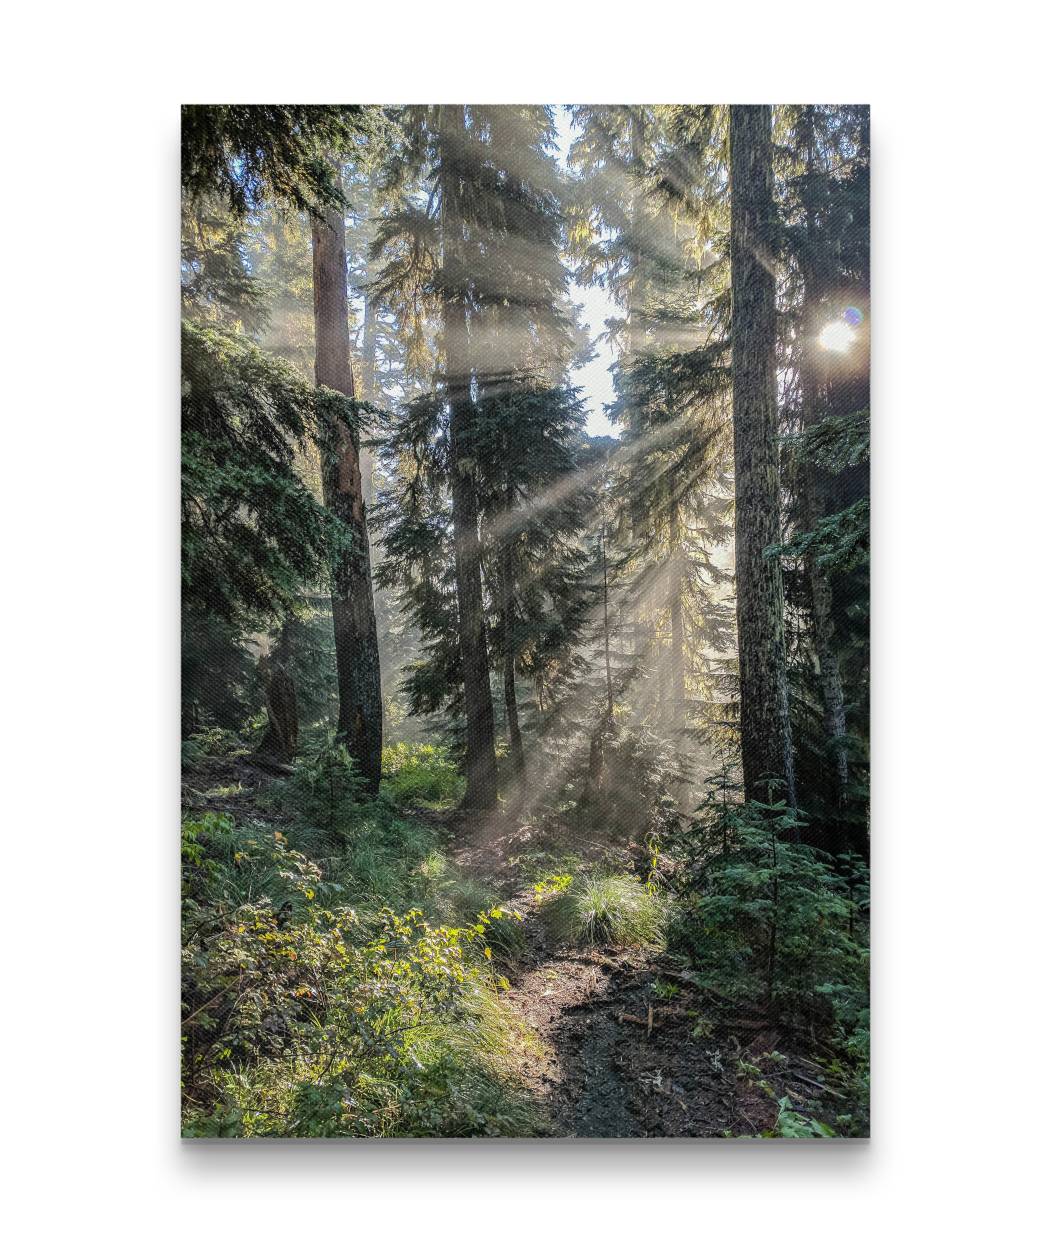 Sun Rays Through Forest, Carpenter Mountain Trail, HJ Andrews Forest, Oregon, USA